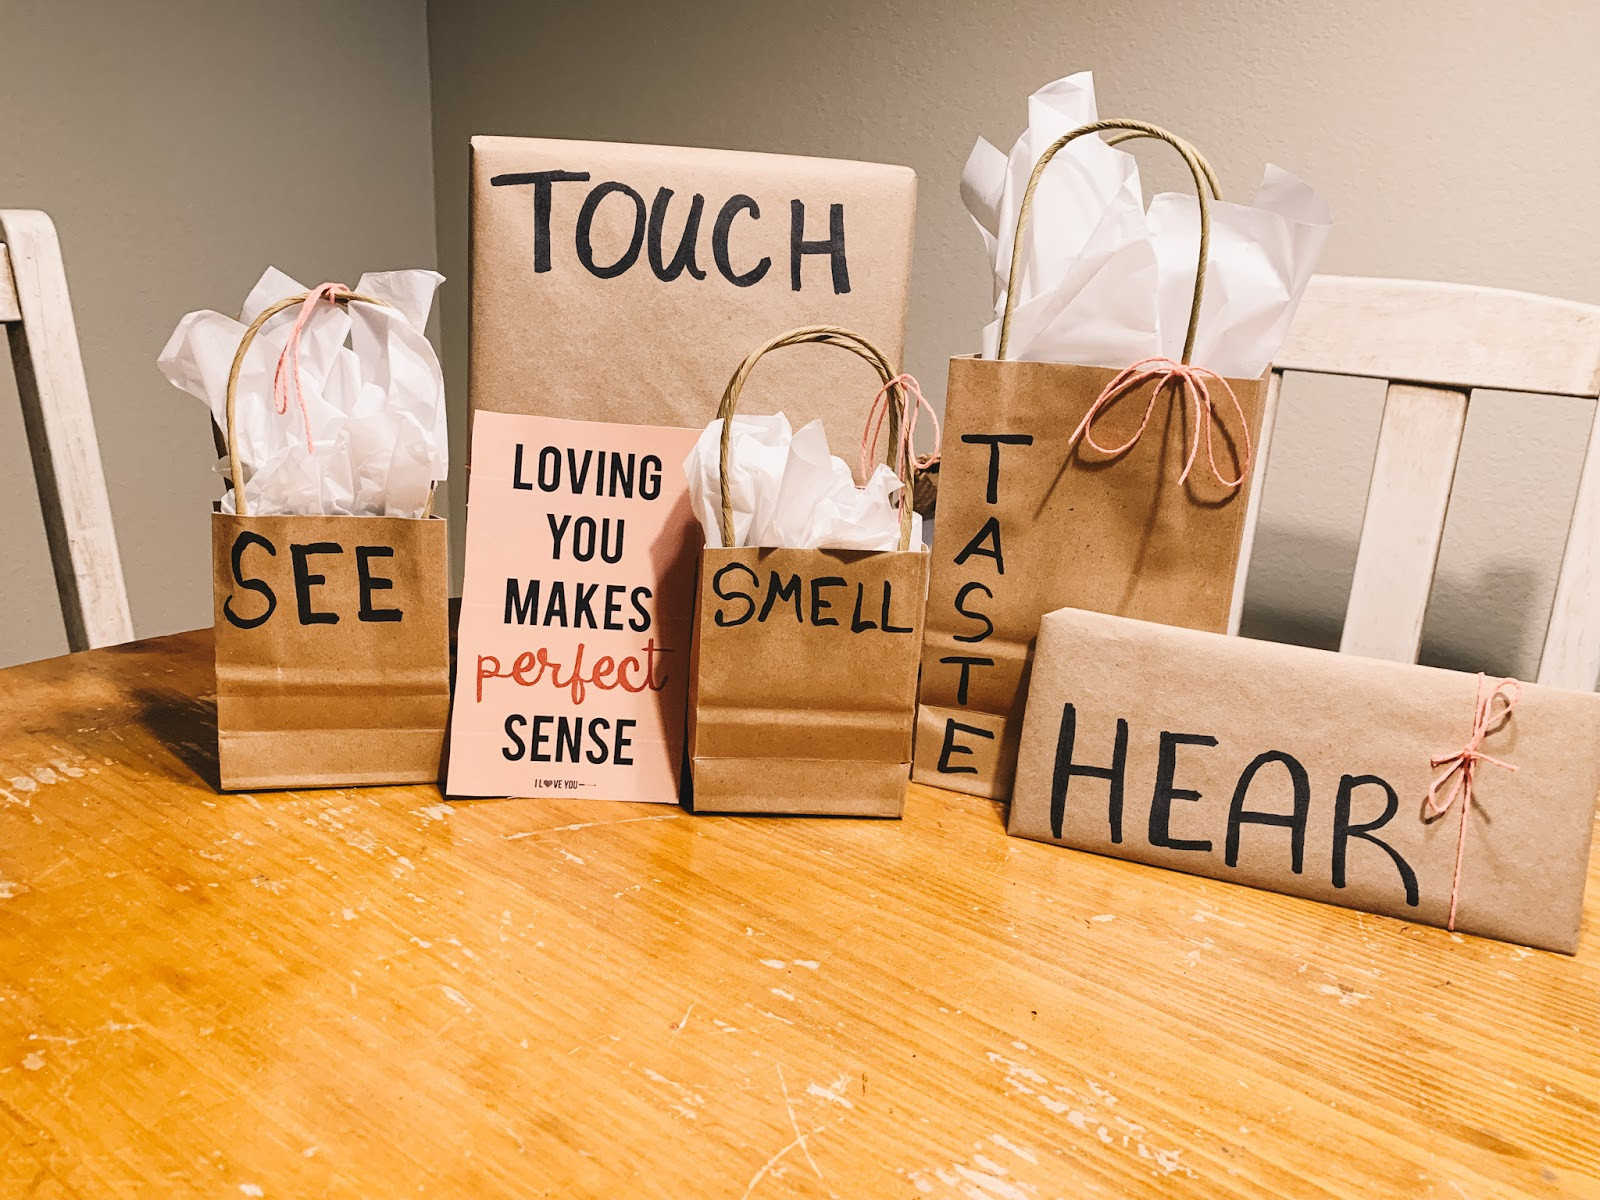 Valentines Day Gifts For Boyfriend
 The 5 Senses Valentines Day Gift Ideas for Him & Her